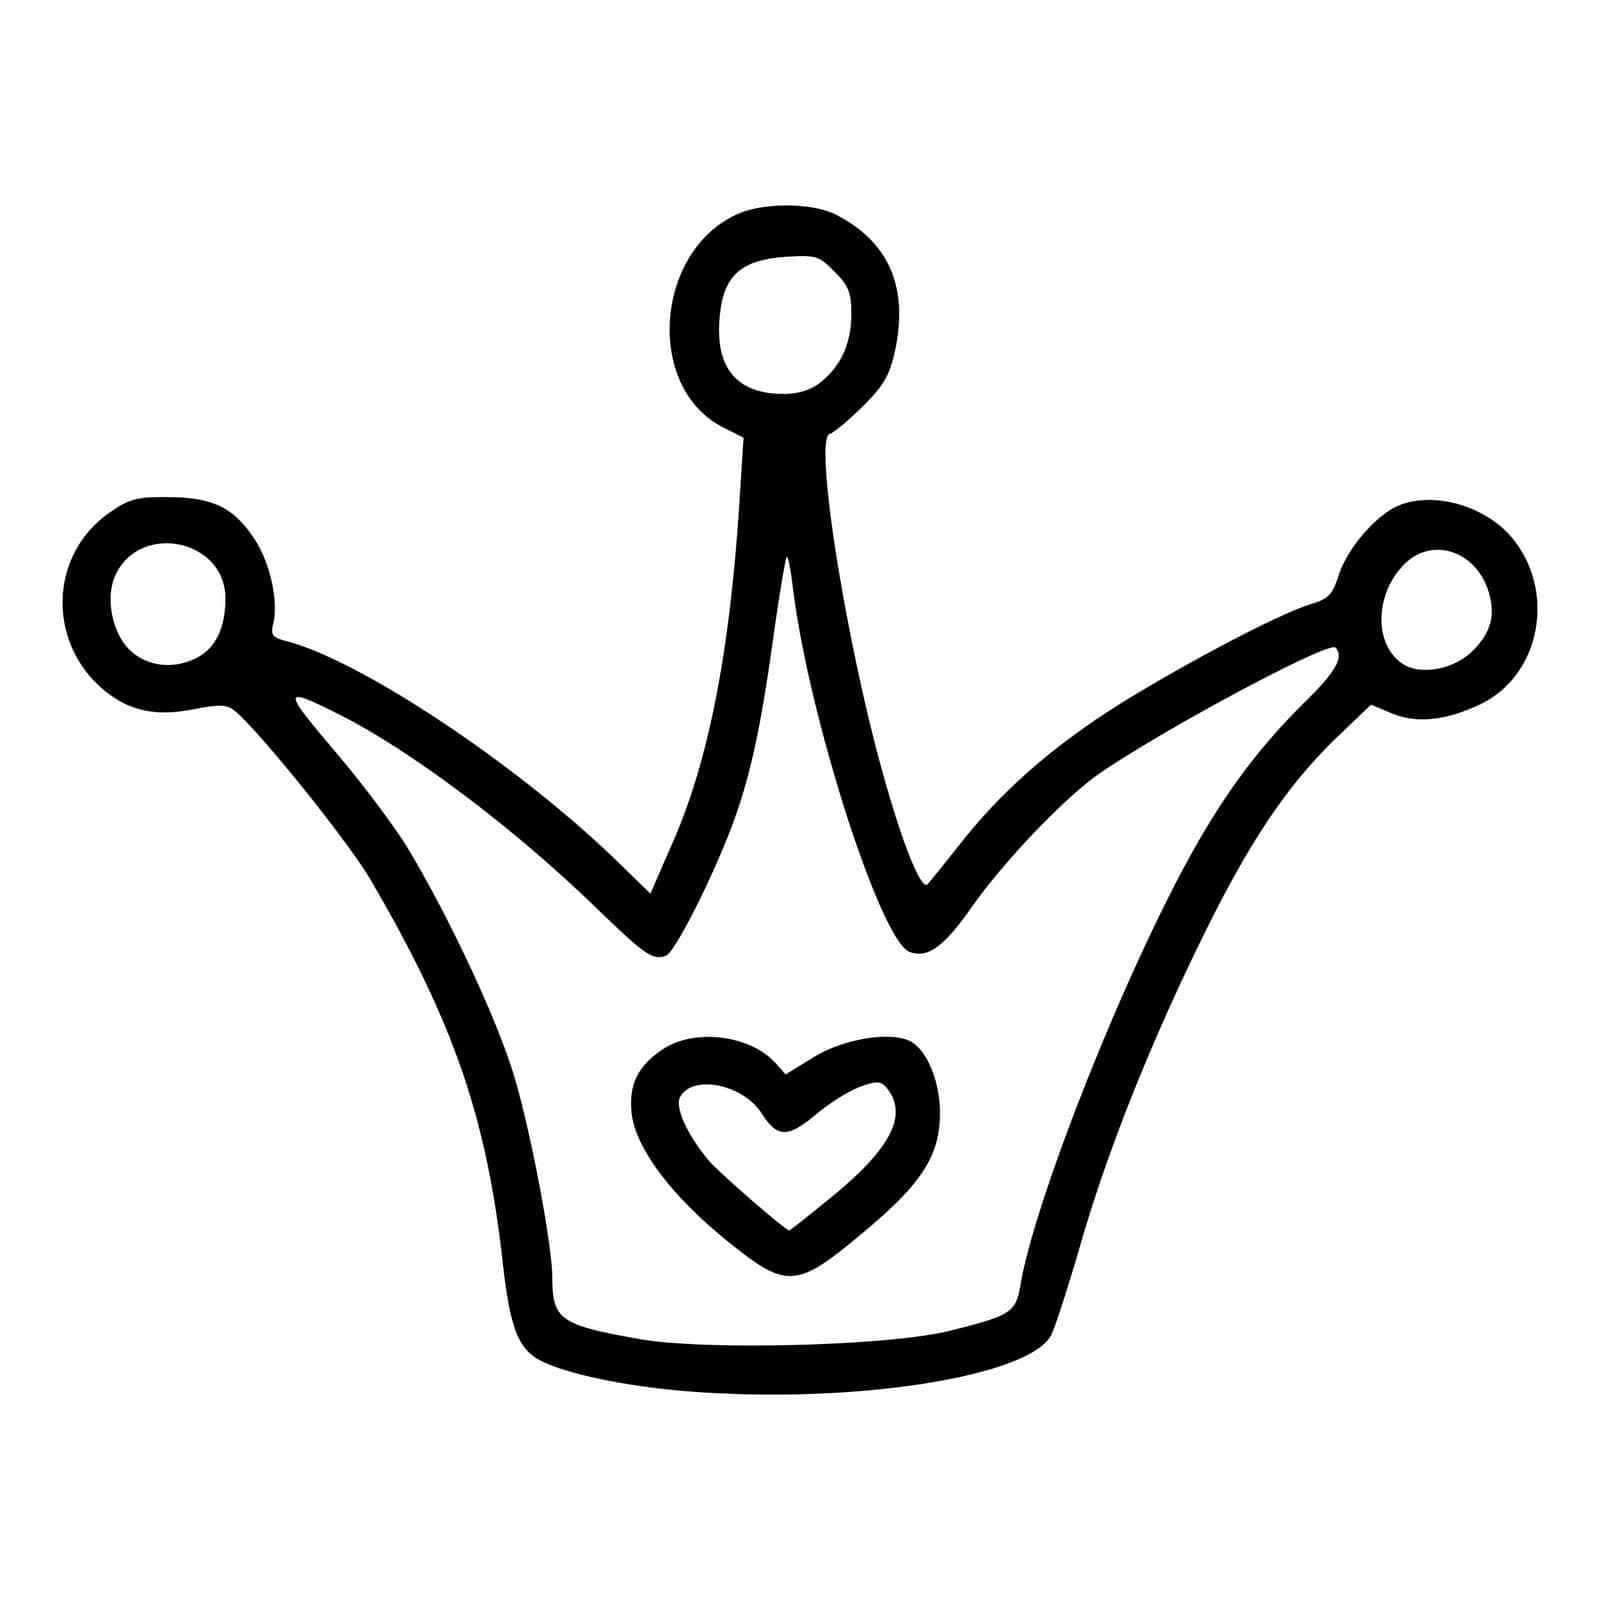 Crown in style of doodles. Accessory of princess and queen. Vector icon for children coloring pages.